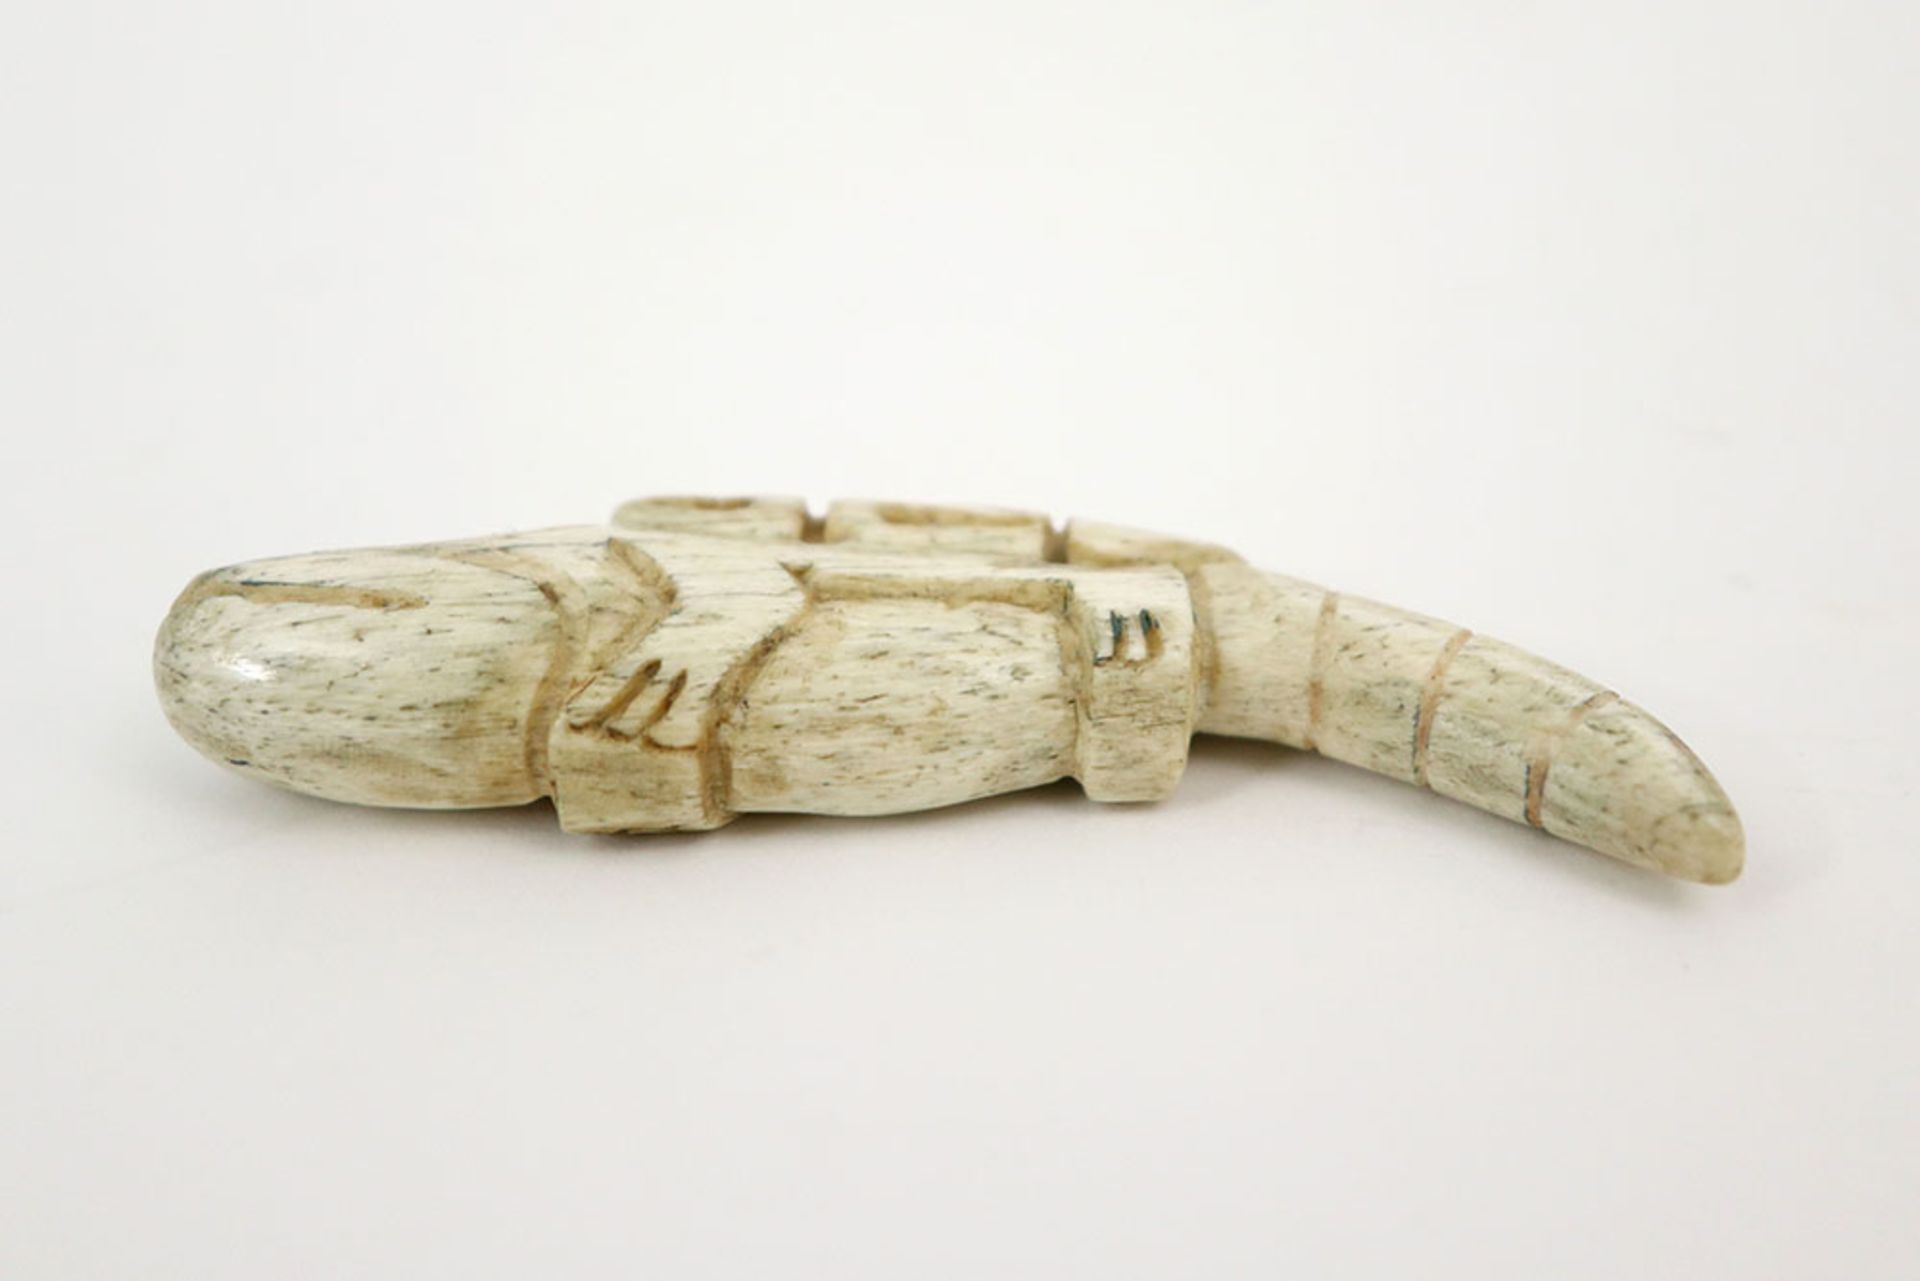 20th Cent. North West American Tlingit sculpture/sharm in cetacean bone with the typical - Image 4 of 4